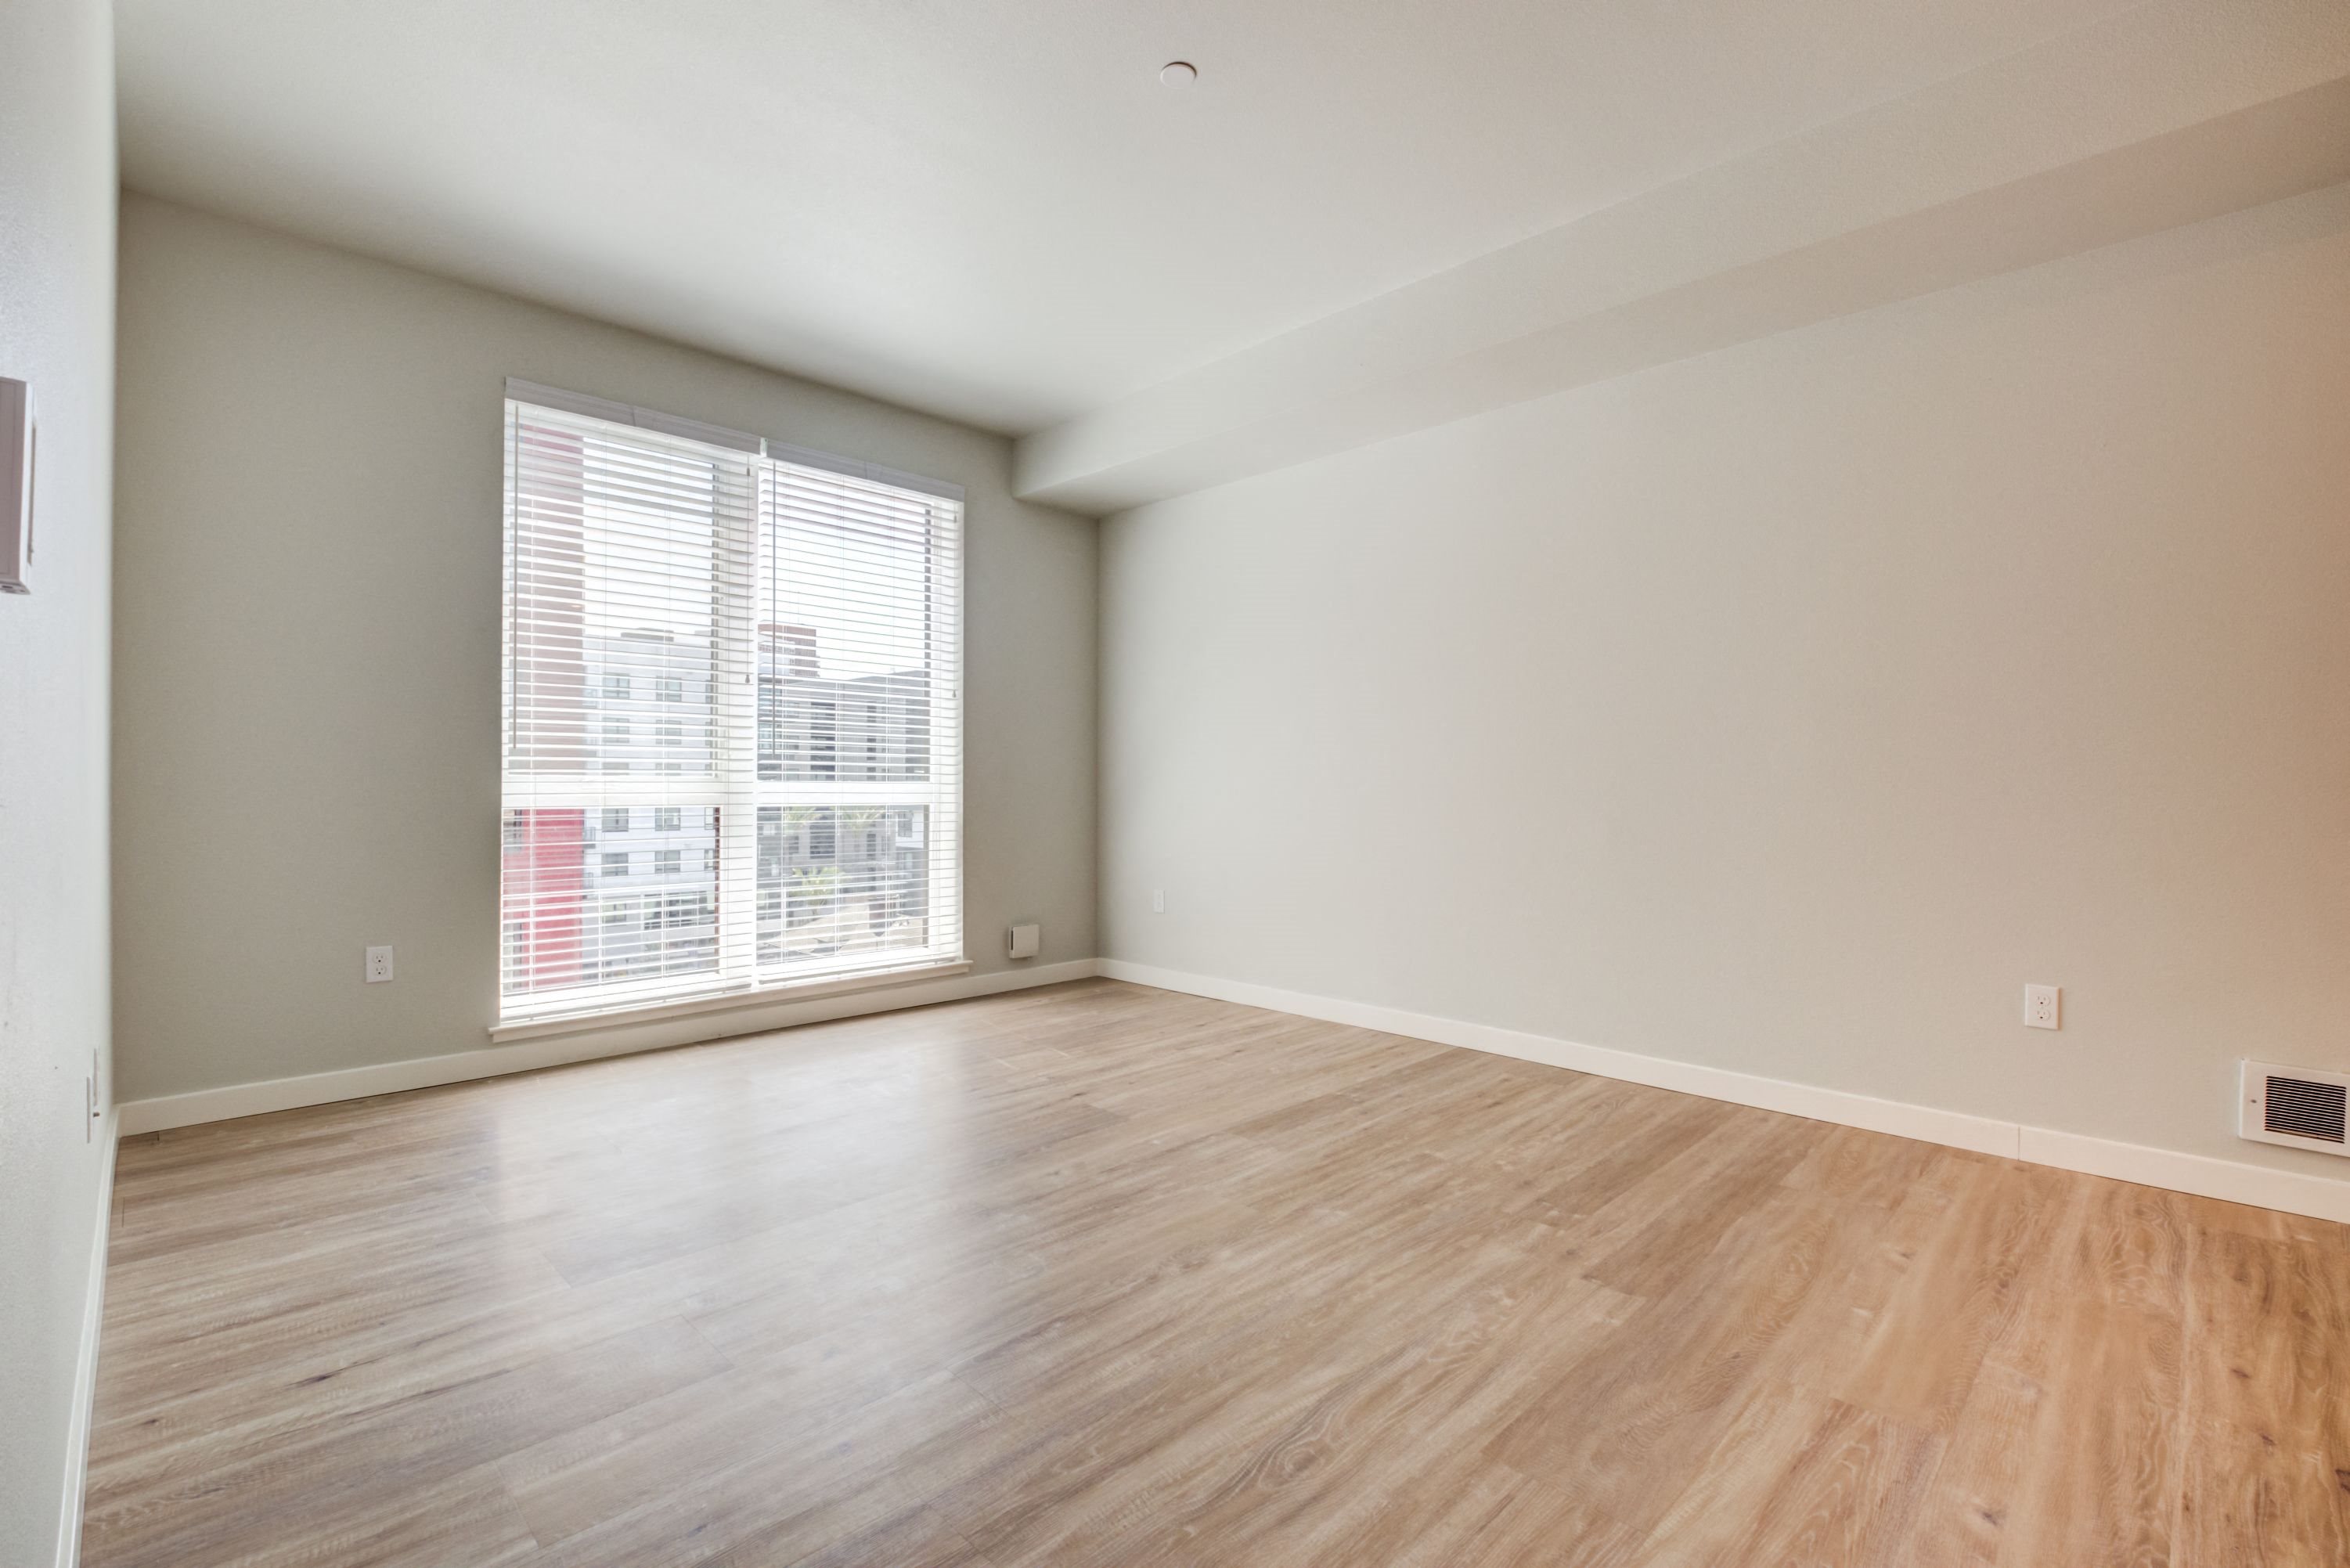 Large room with wood floors and patio window